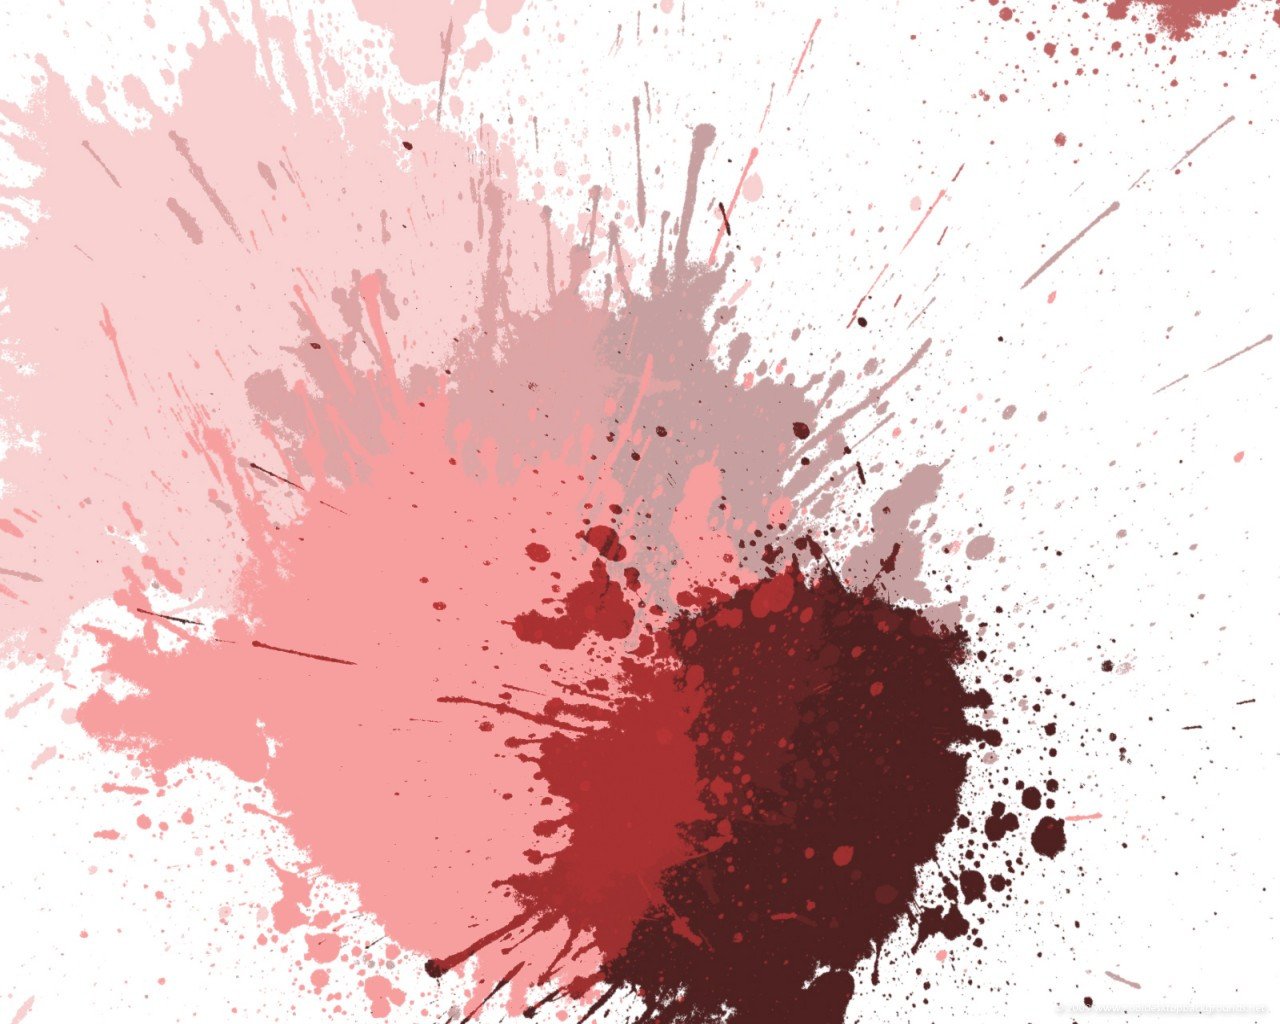 Blood Splatter Background PowerPoint Backgrounds for